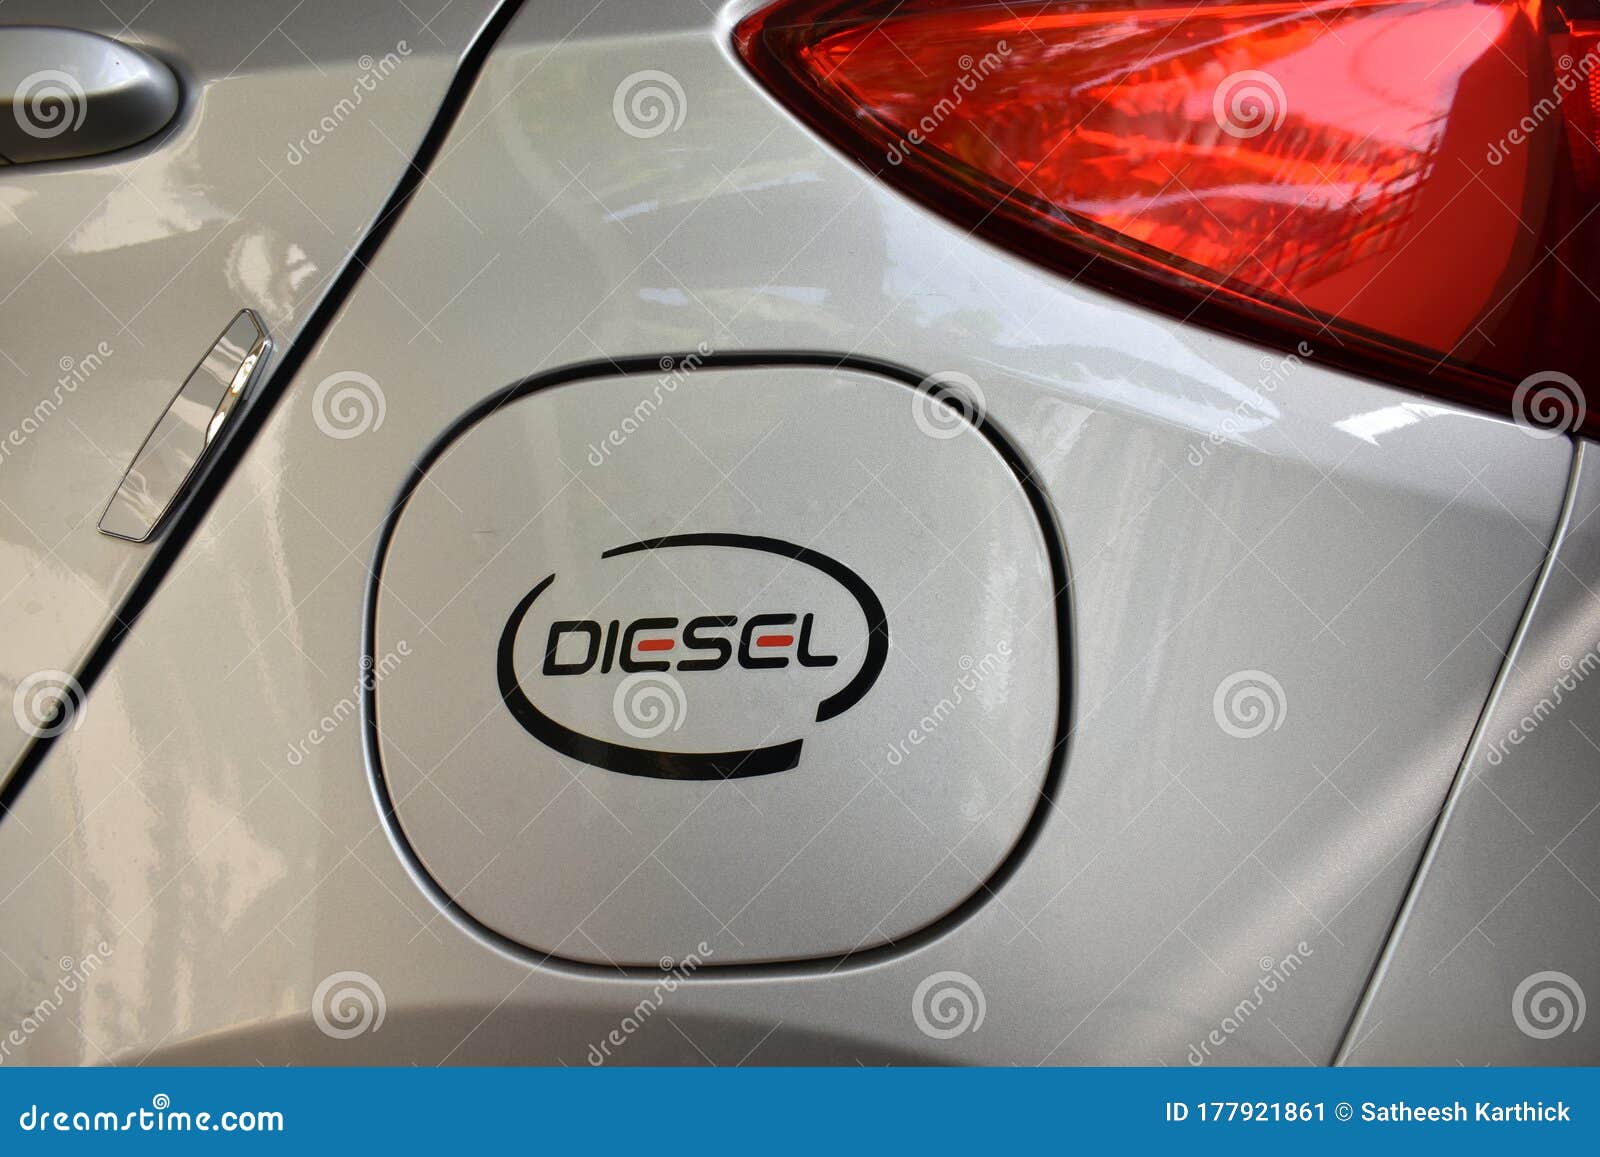 Fuel Tank Stickers For Cars Factory Sale - www.puzzlewood.net 1696495712